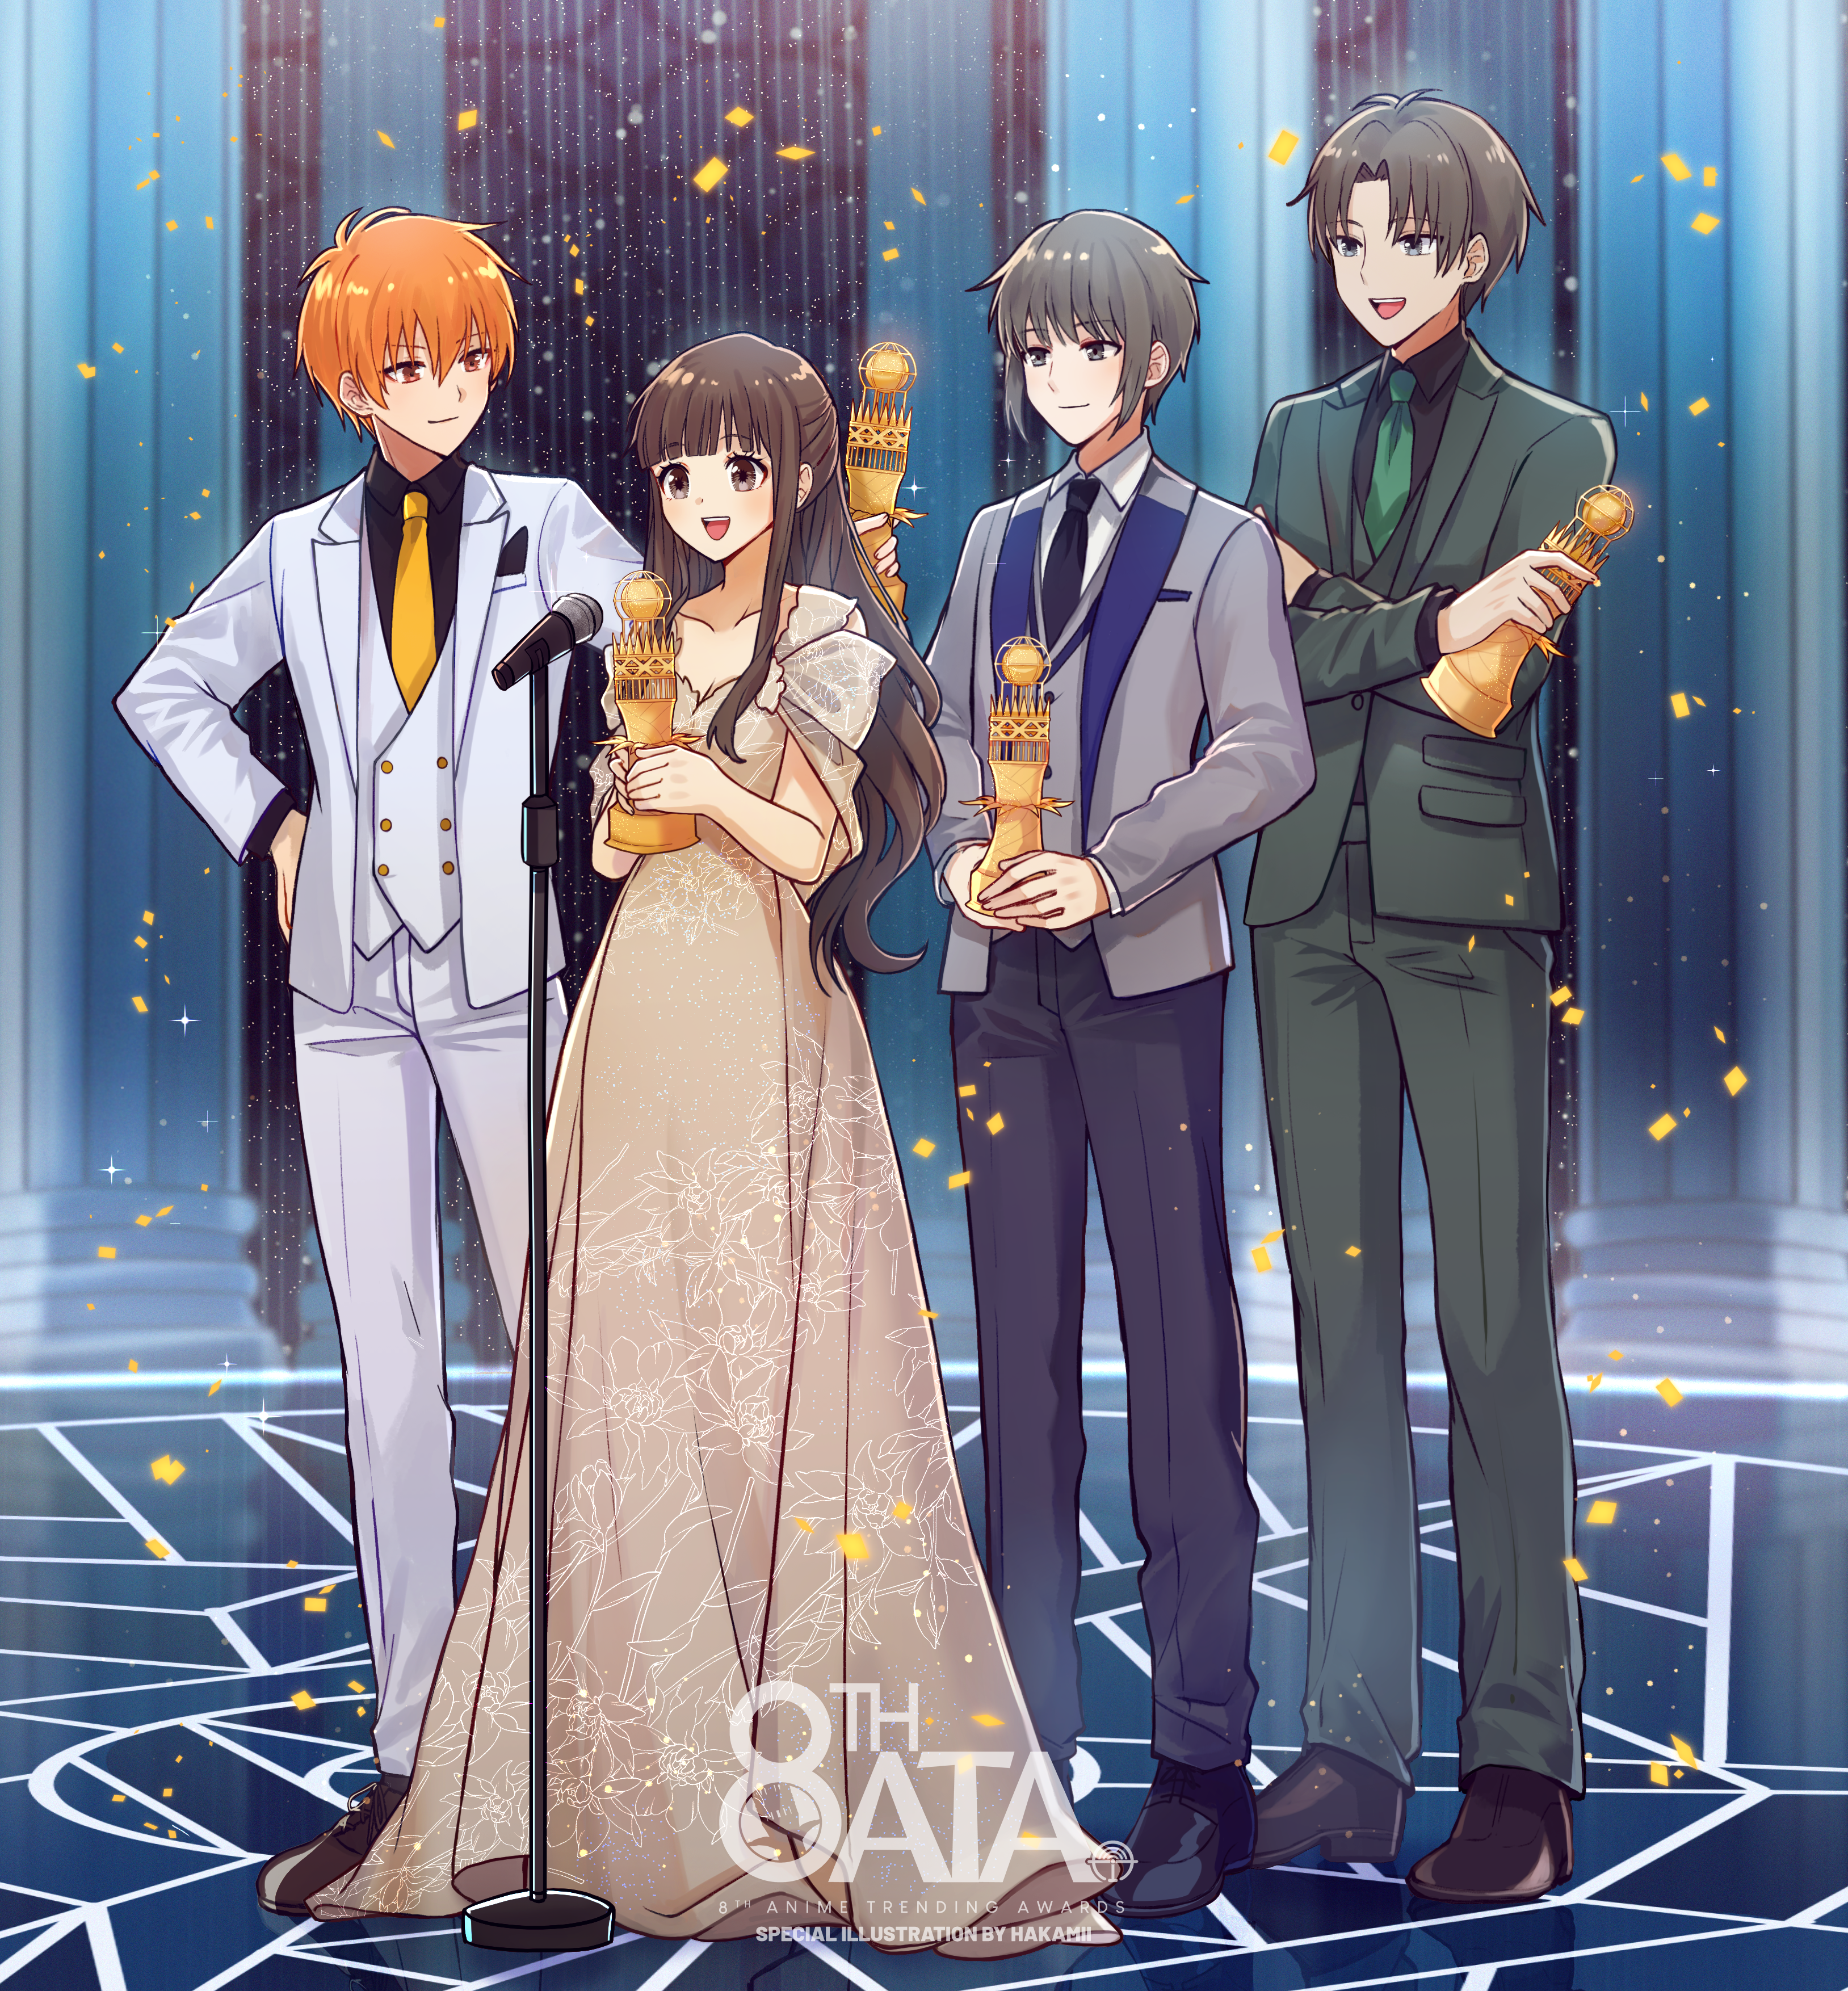 Fruits Basket finally wins Anime of the Year on its third nomination!